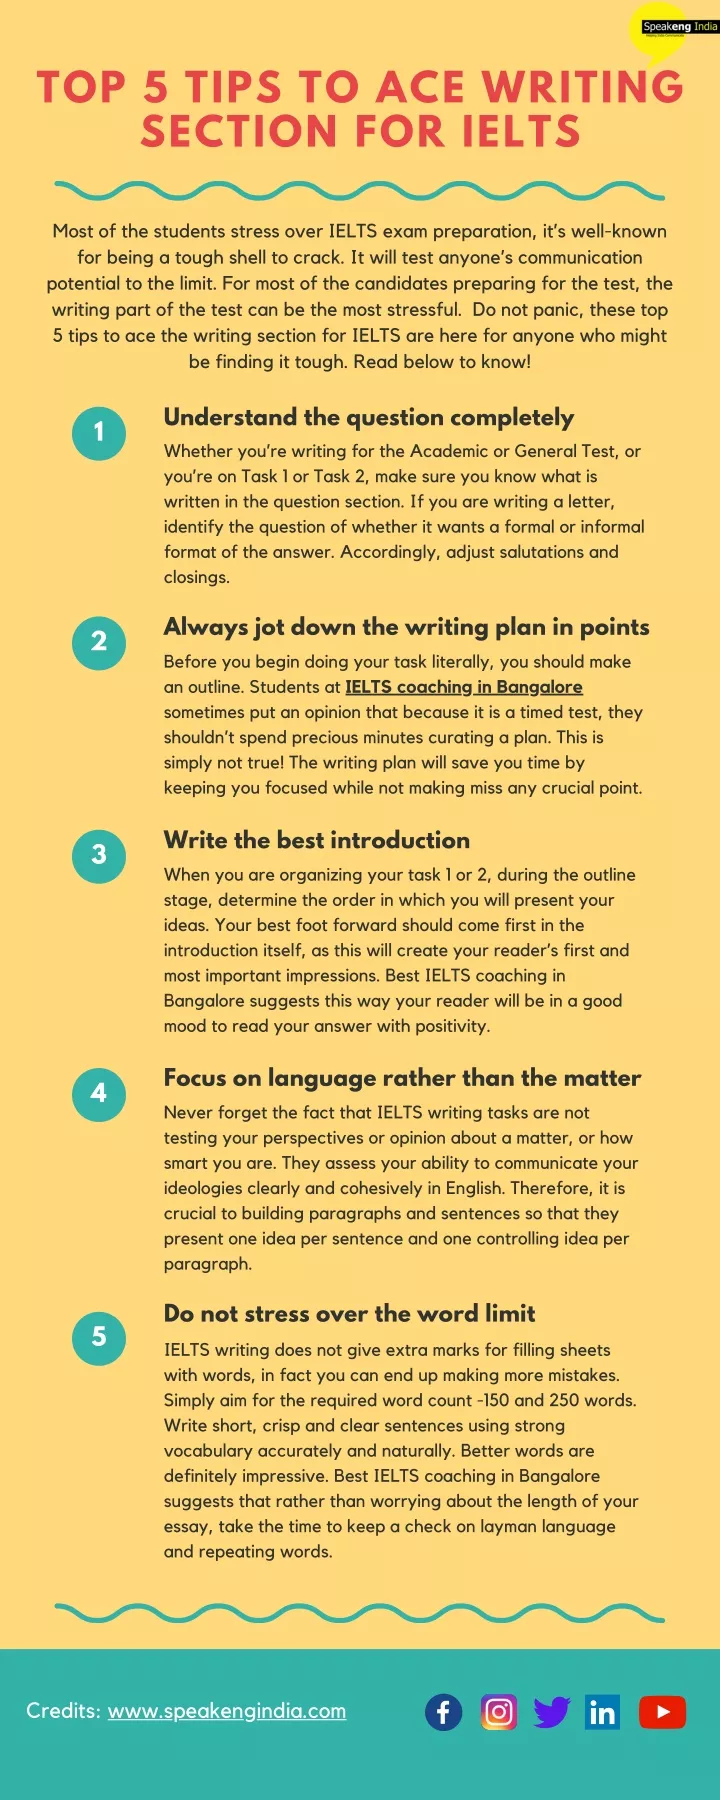 top 5 tips to ace writing section for ielts